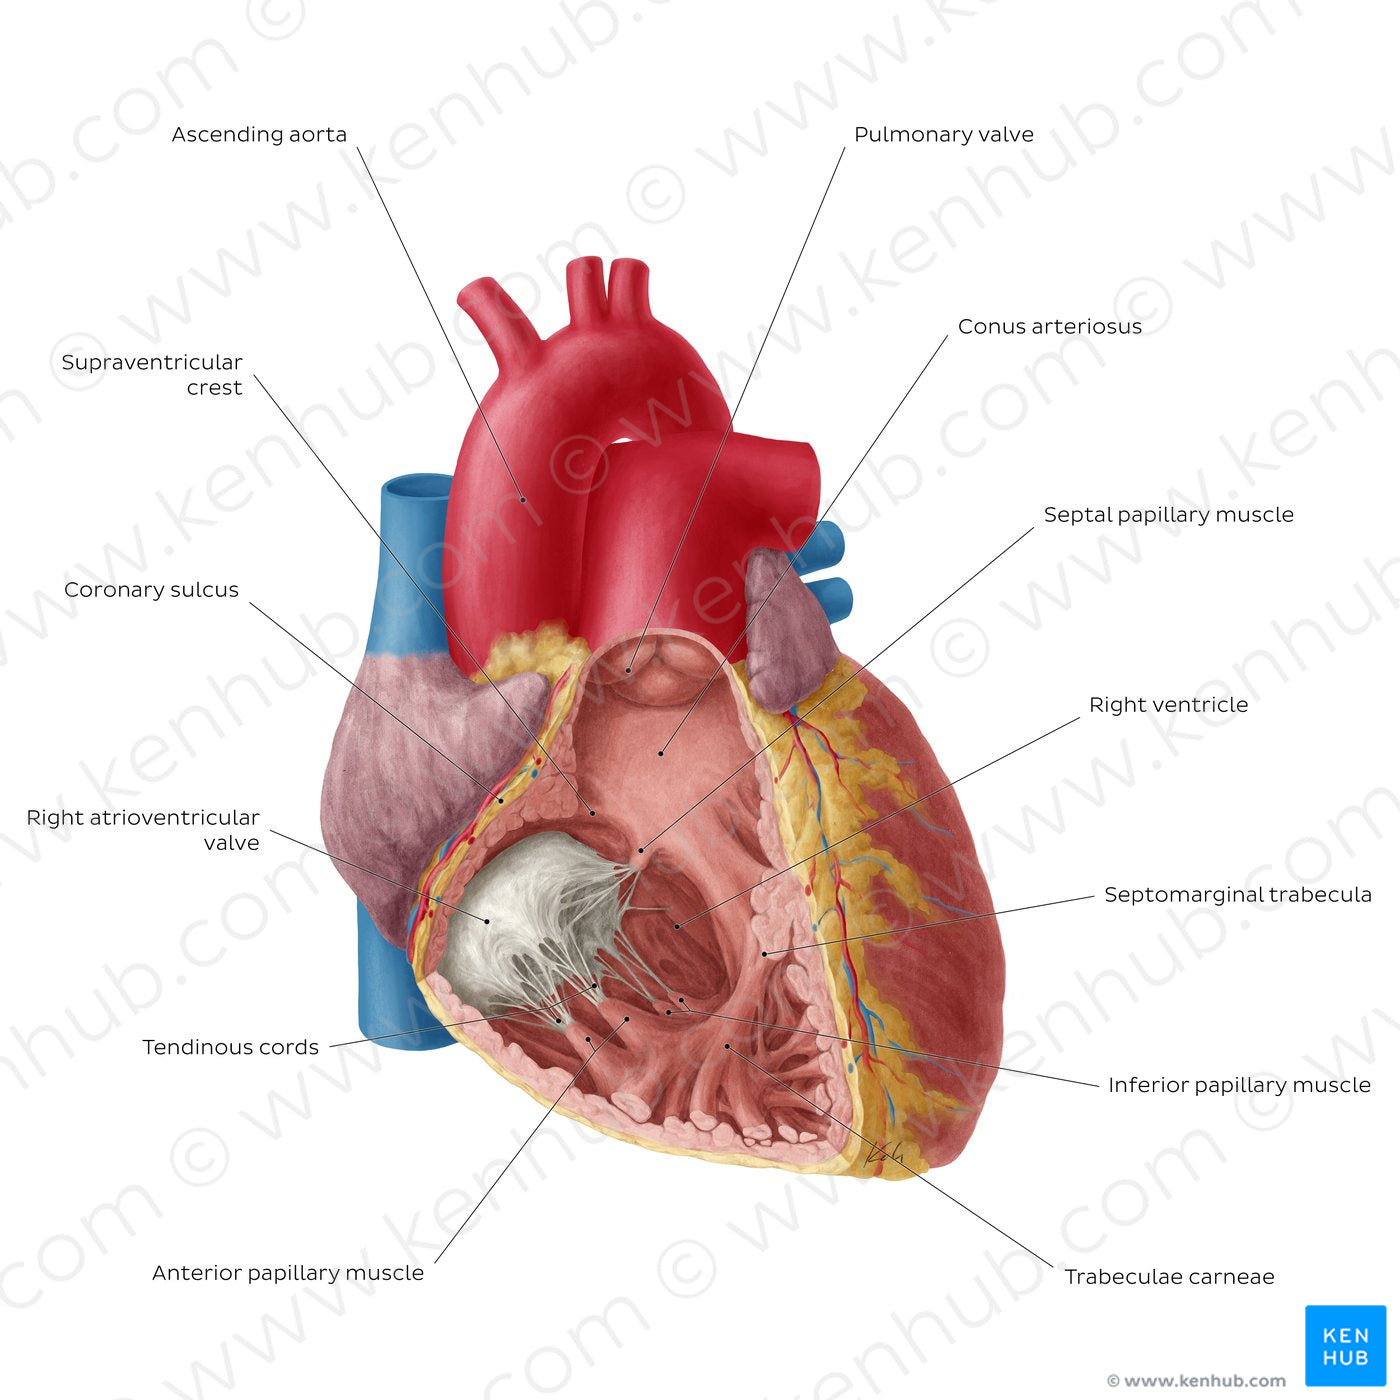 Heart: Right ventricle (English)